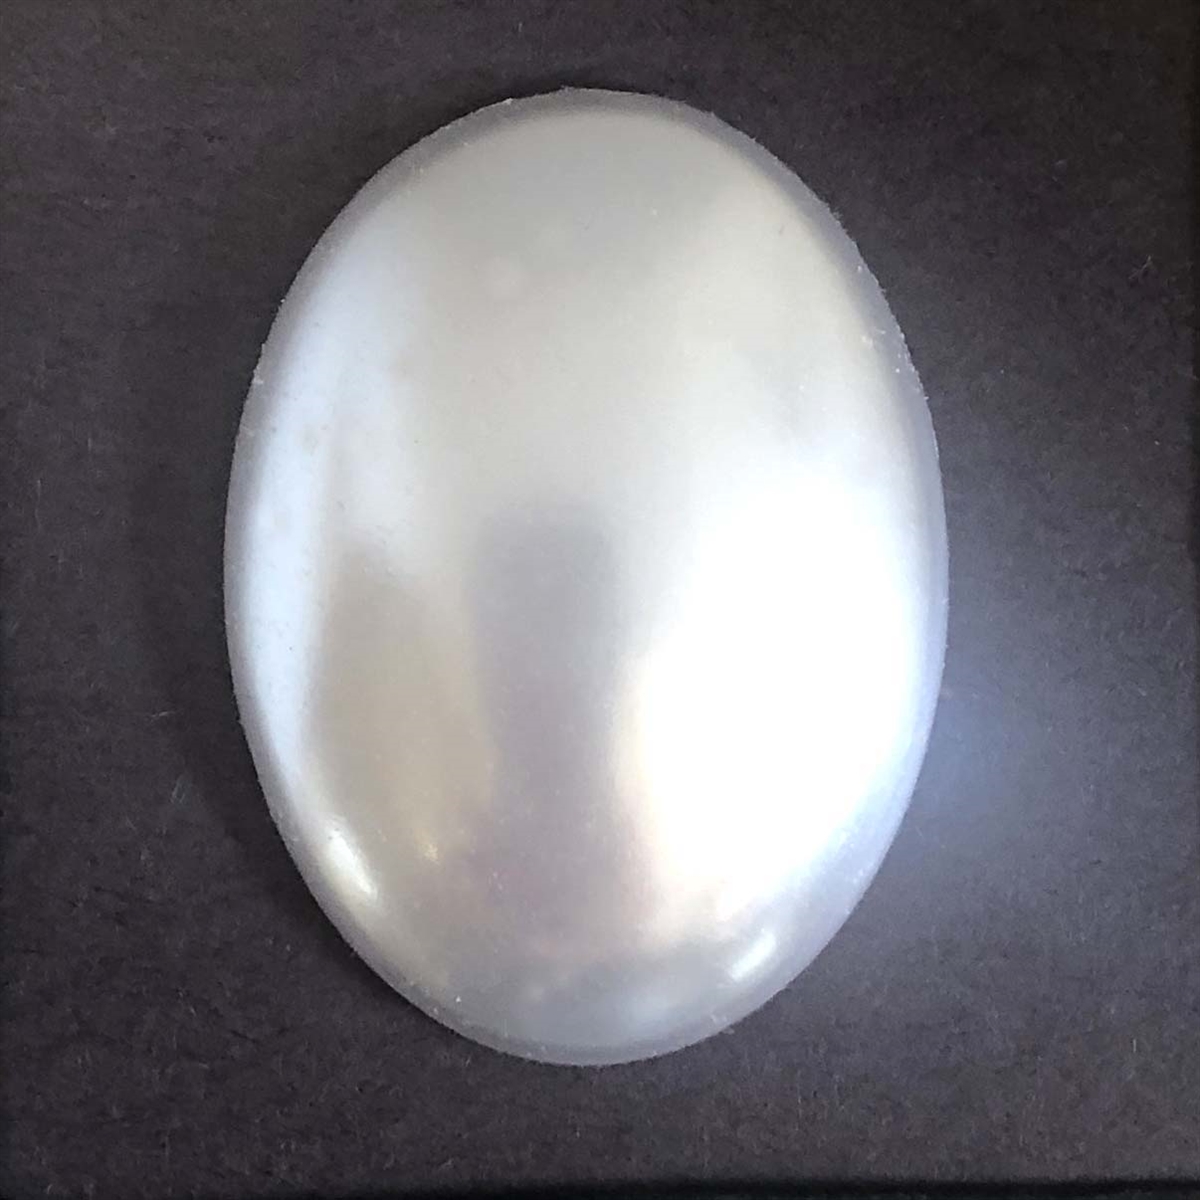 pearls, no hole pearls, flat backs, white, 8mm, bsueboutiques